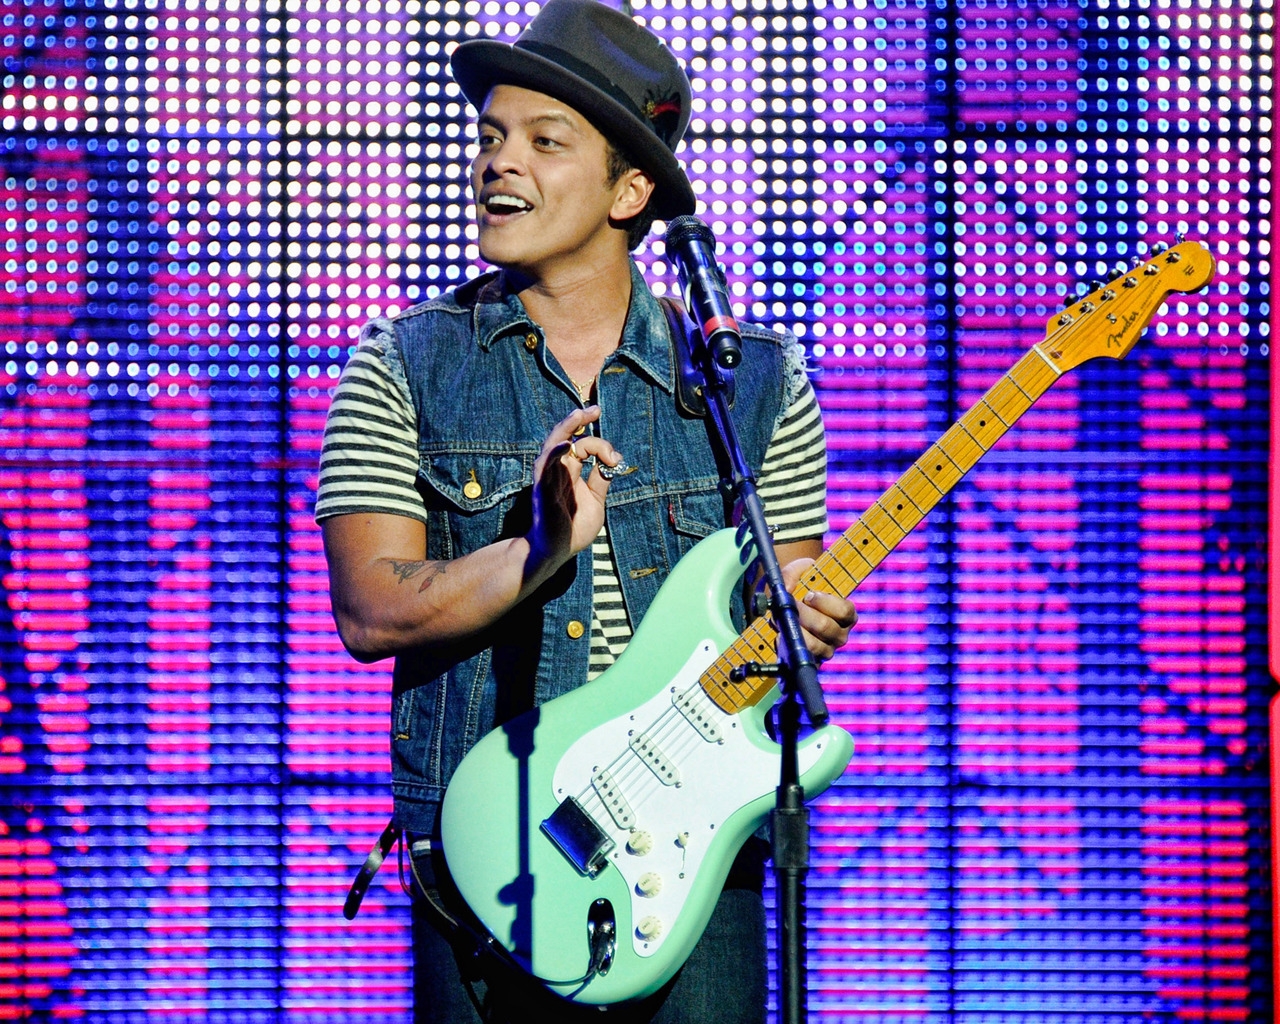 Bruno Mars in Concert for 1280 x 1024 resolution